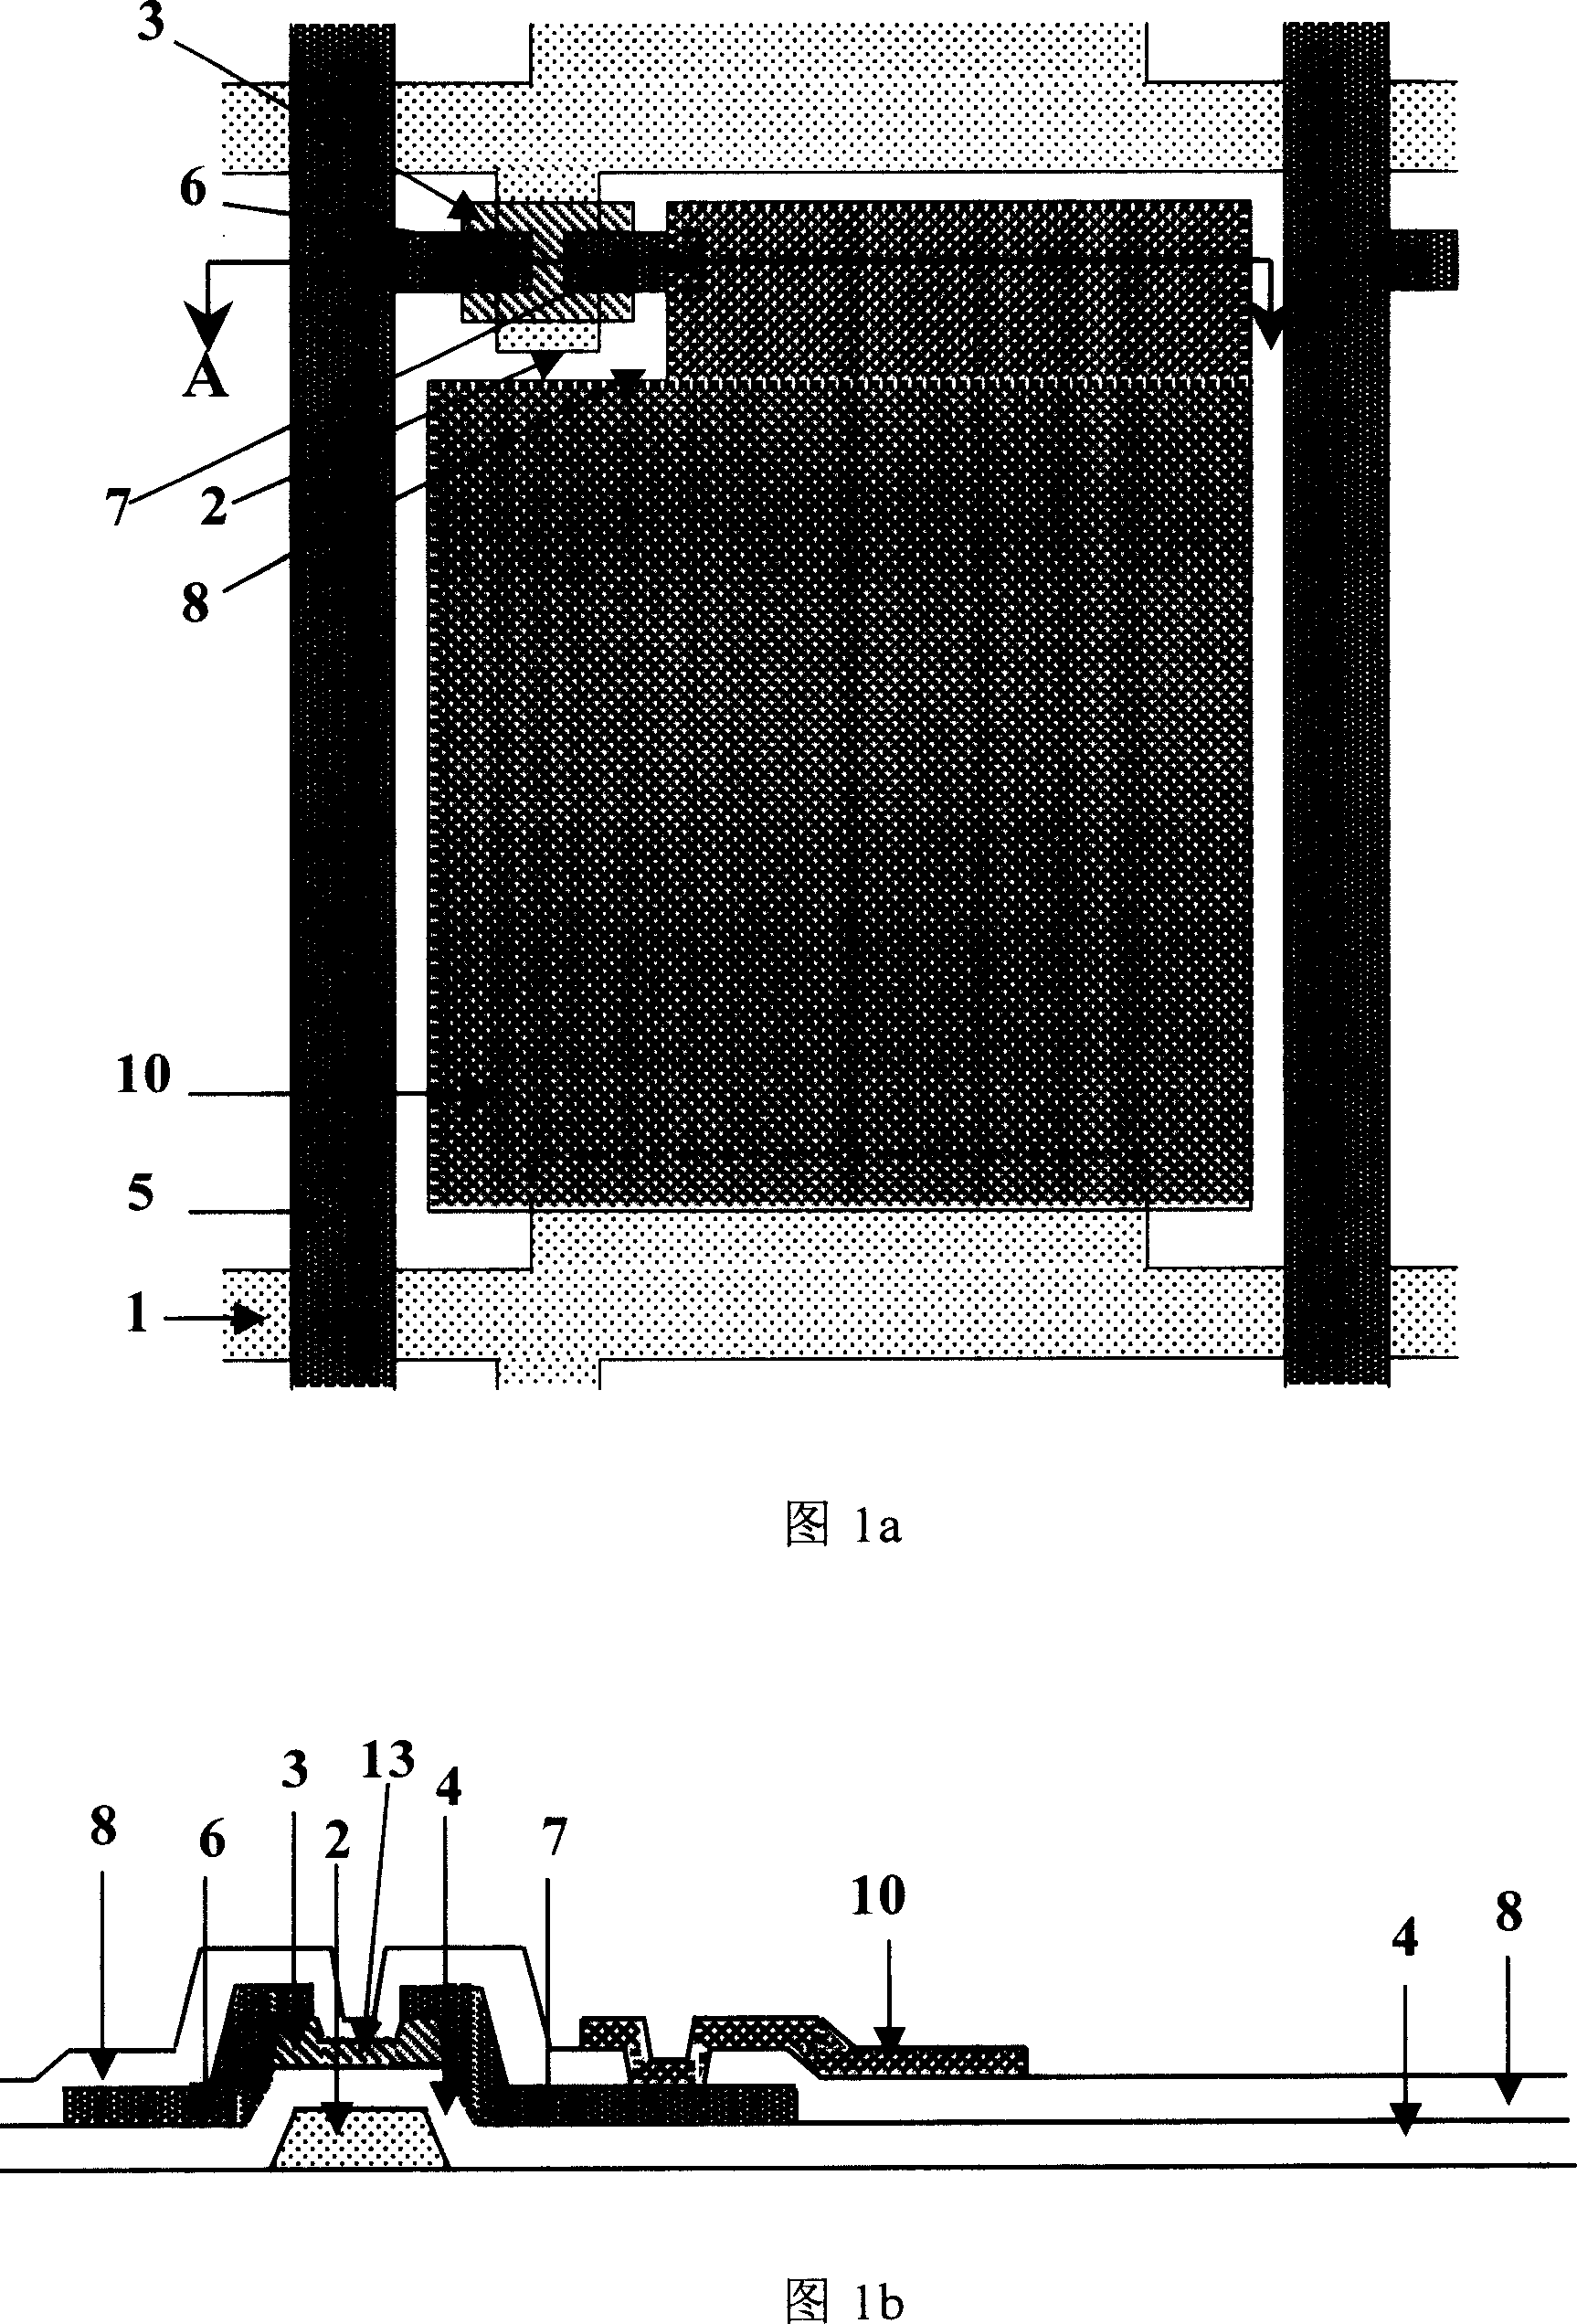 Array base board structure of thin film transistor liquid crystal display and its producing method